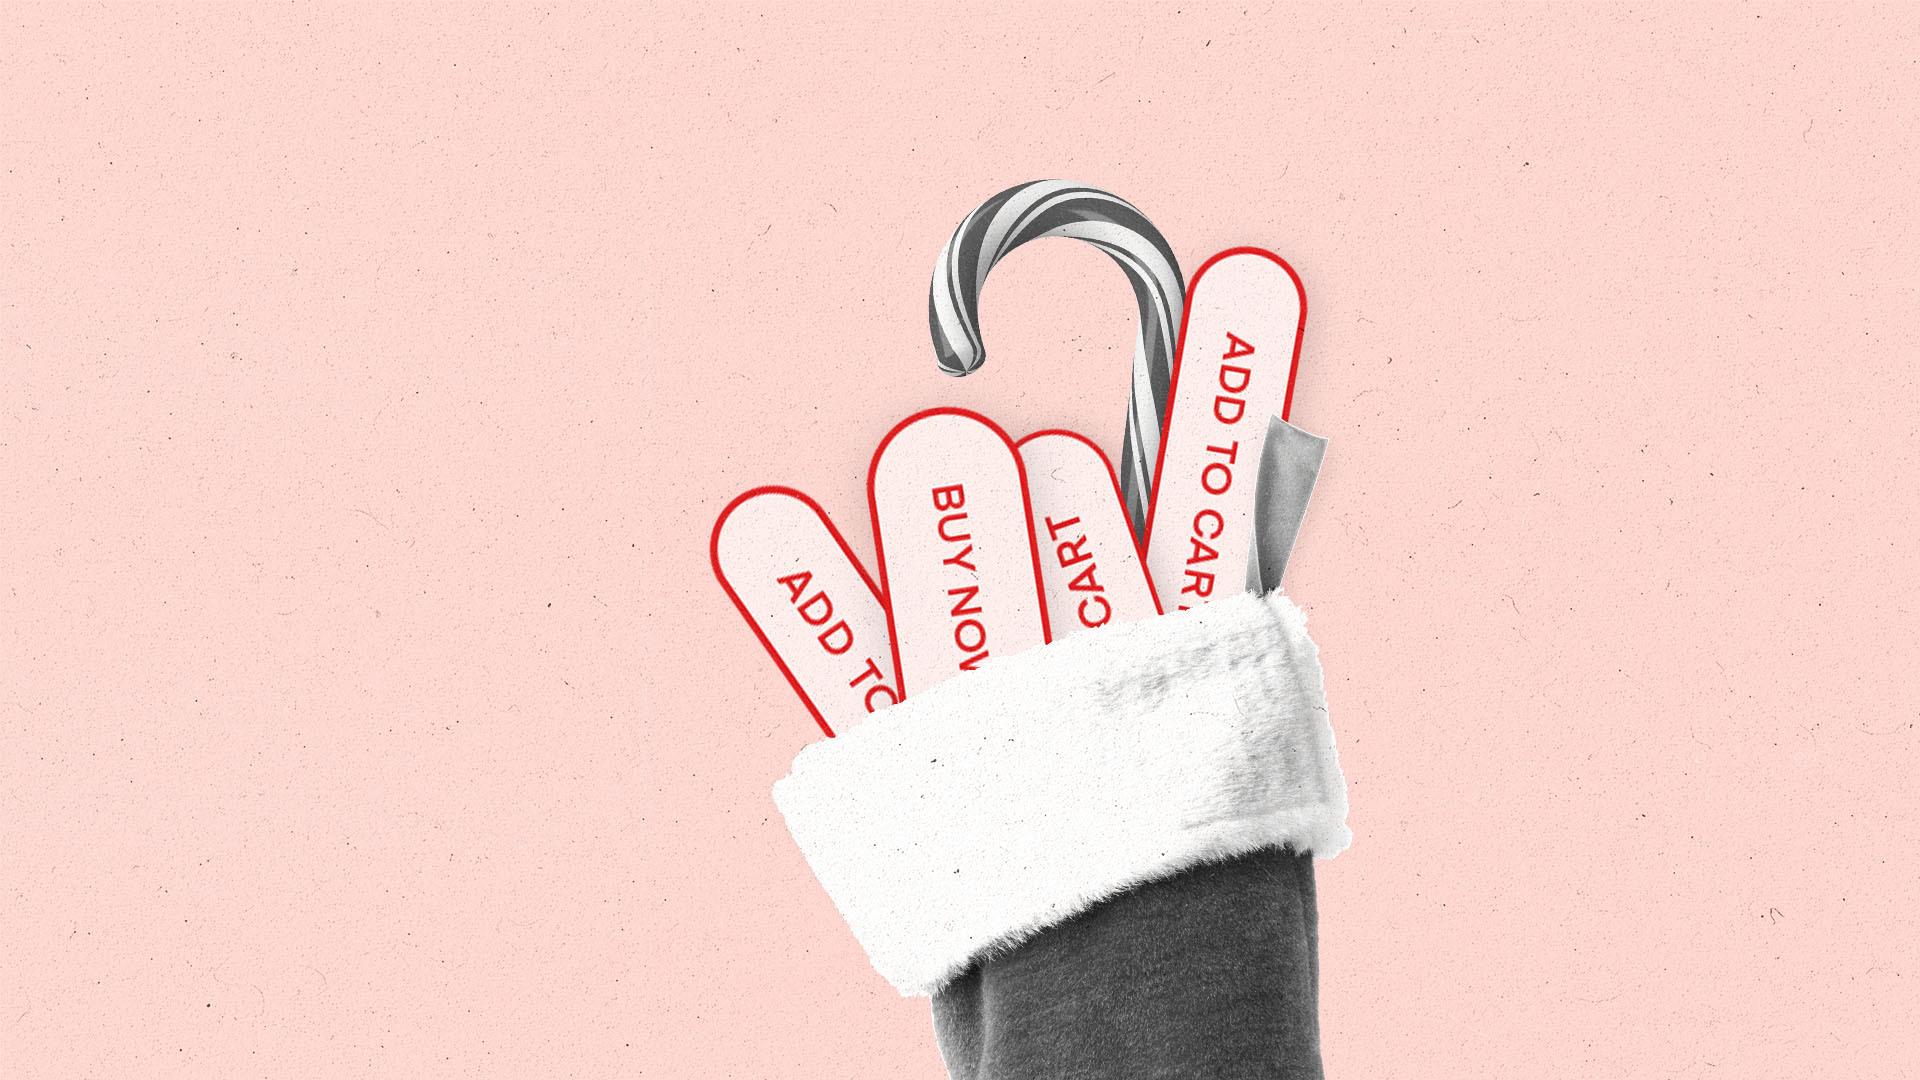 A christmas stocking full of “buy now”, “add to cart” buttons, and a candy cane as stocking stuffers.